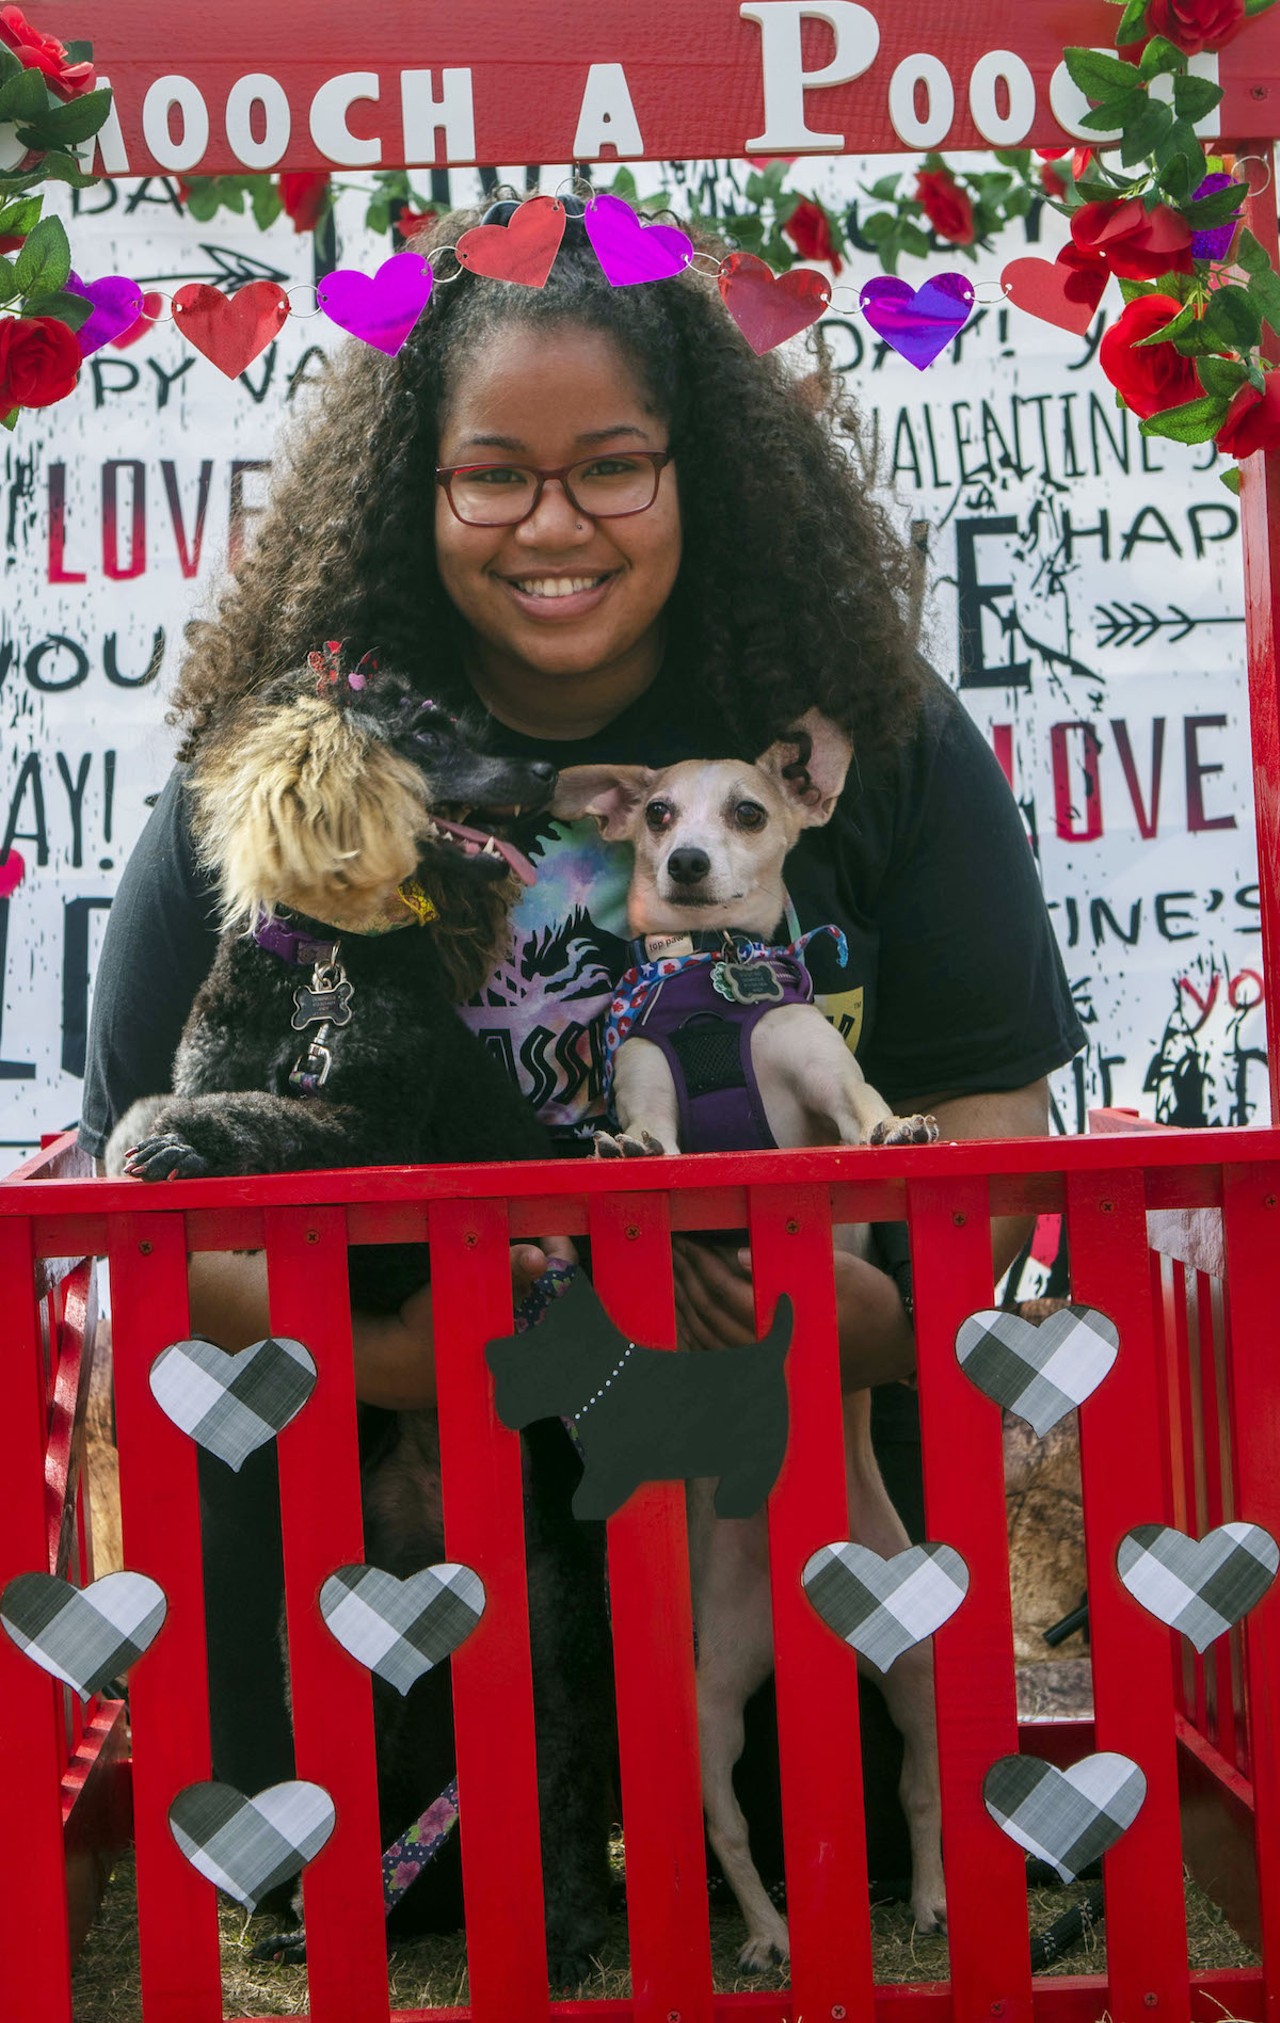 Everyone, and every pup, we saw at Tampa's 'Bark In the Park' fundraiser, Tampa